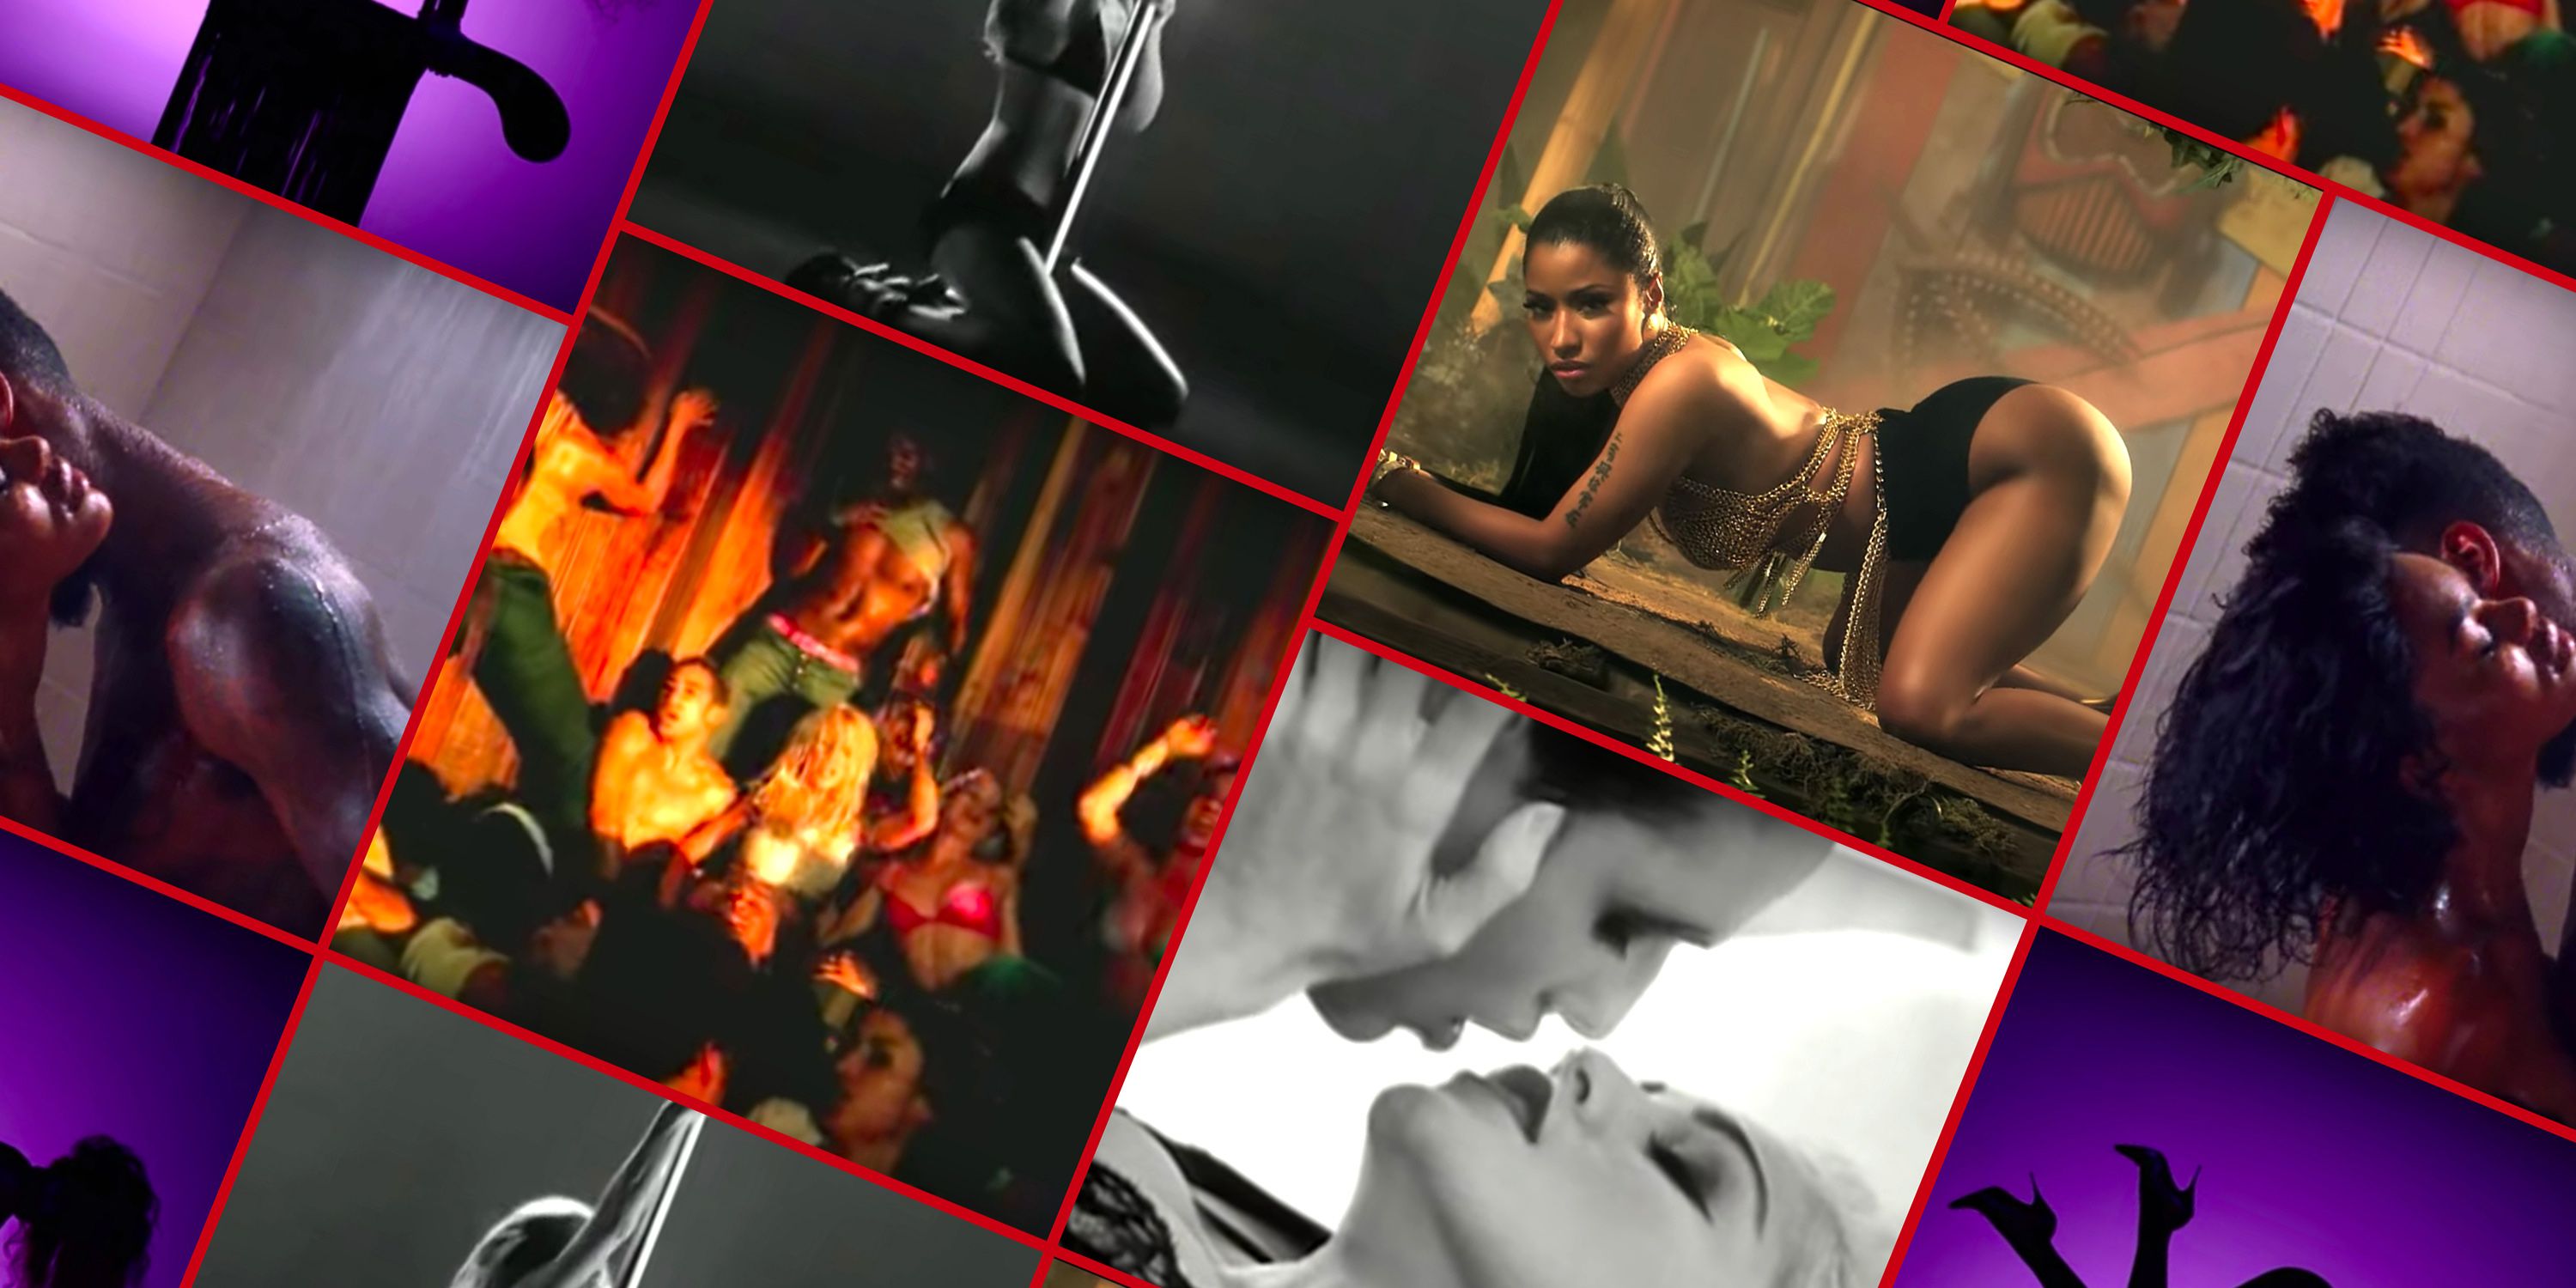 31 Sexiest Music Videos of All Time